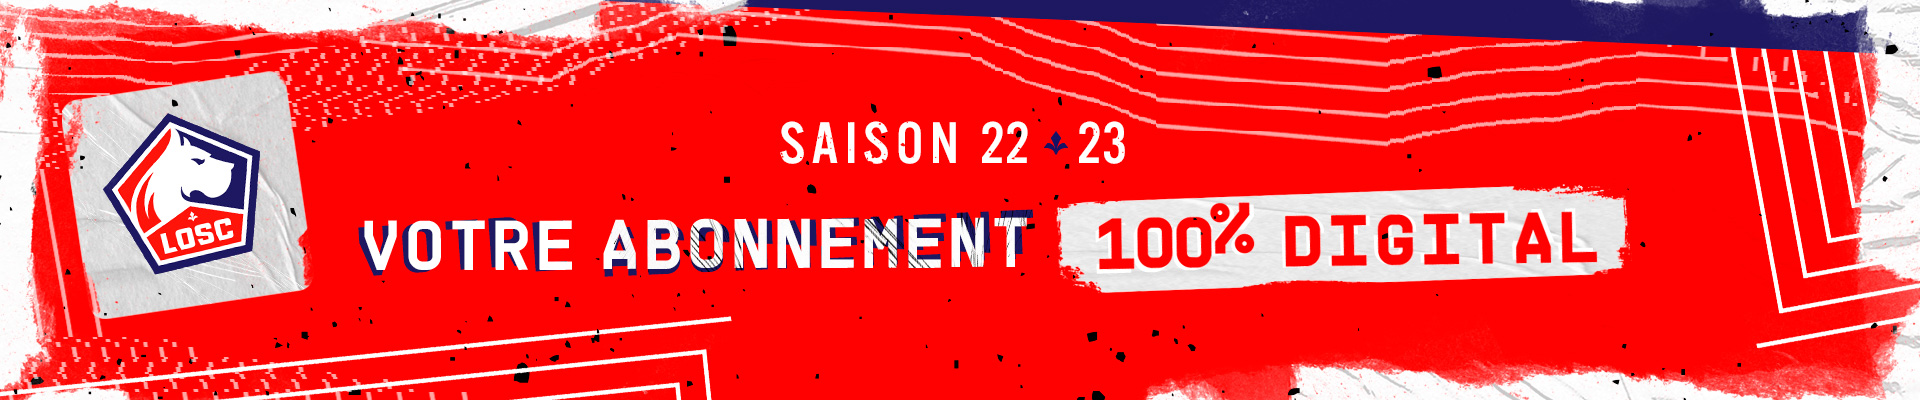 LOSC - Page ABO - INFOS comment -0- 100pc DIGITAL 2022-23.jpg